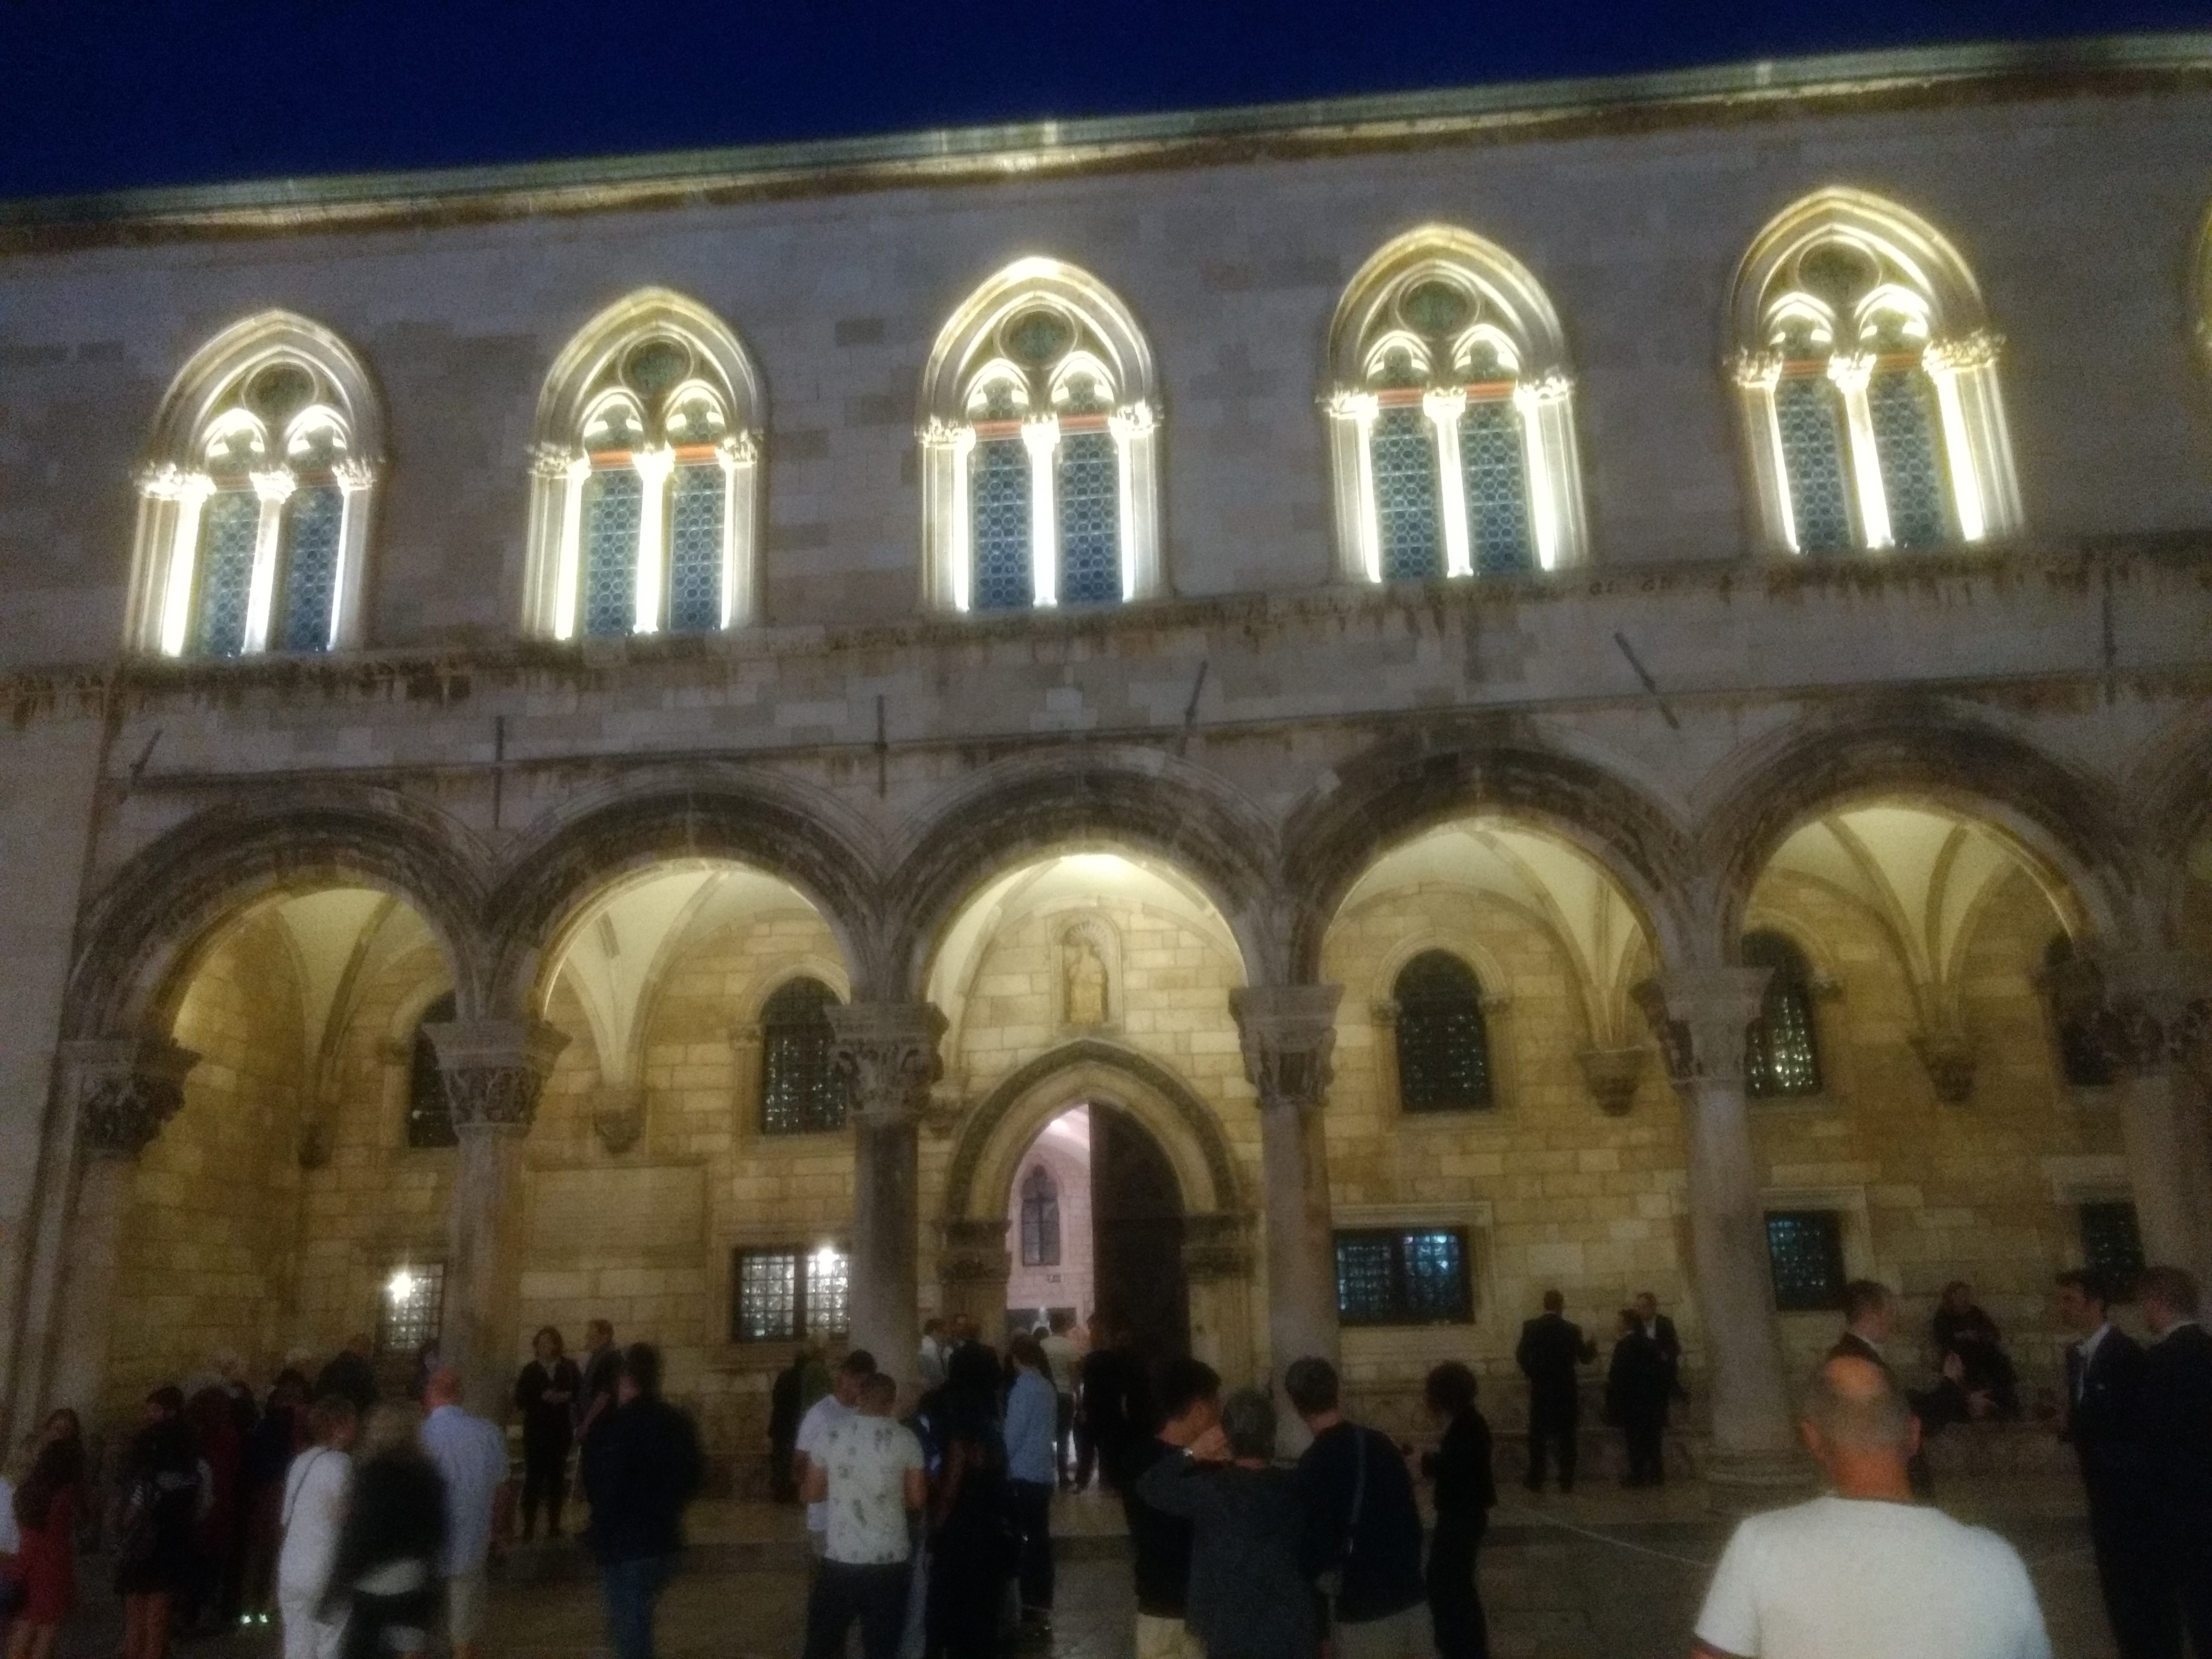 Rector's Palace, Old Town, Dubrovnik, Croatia